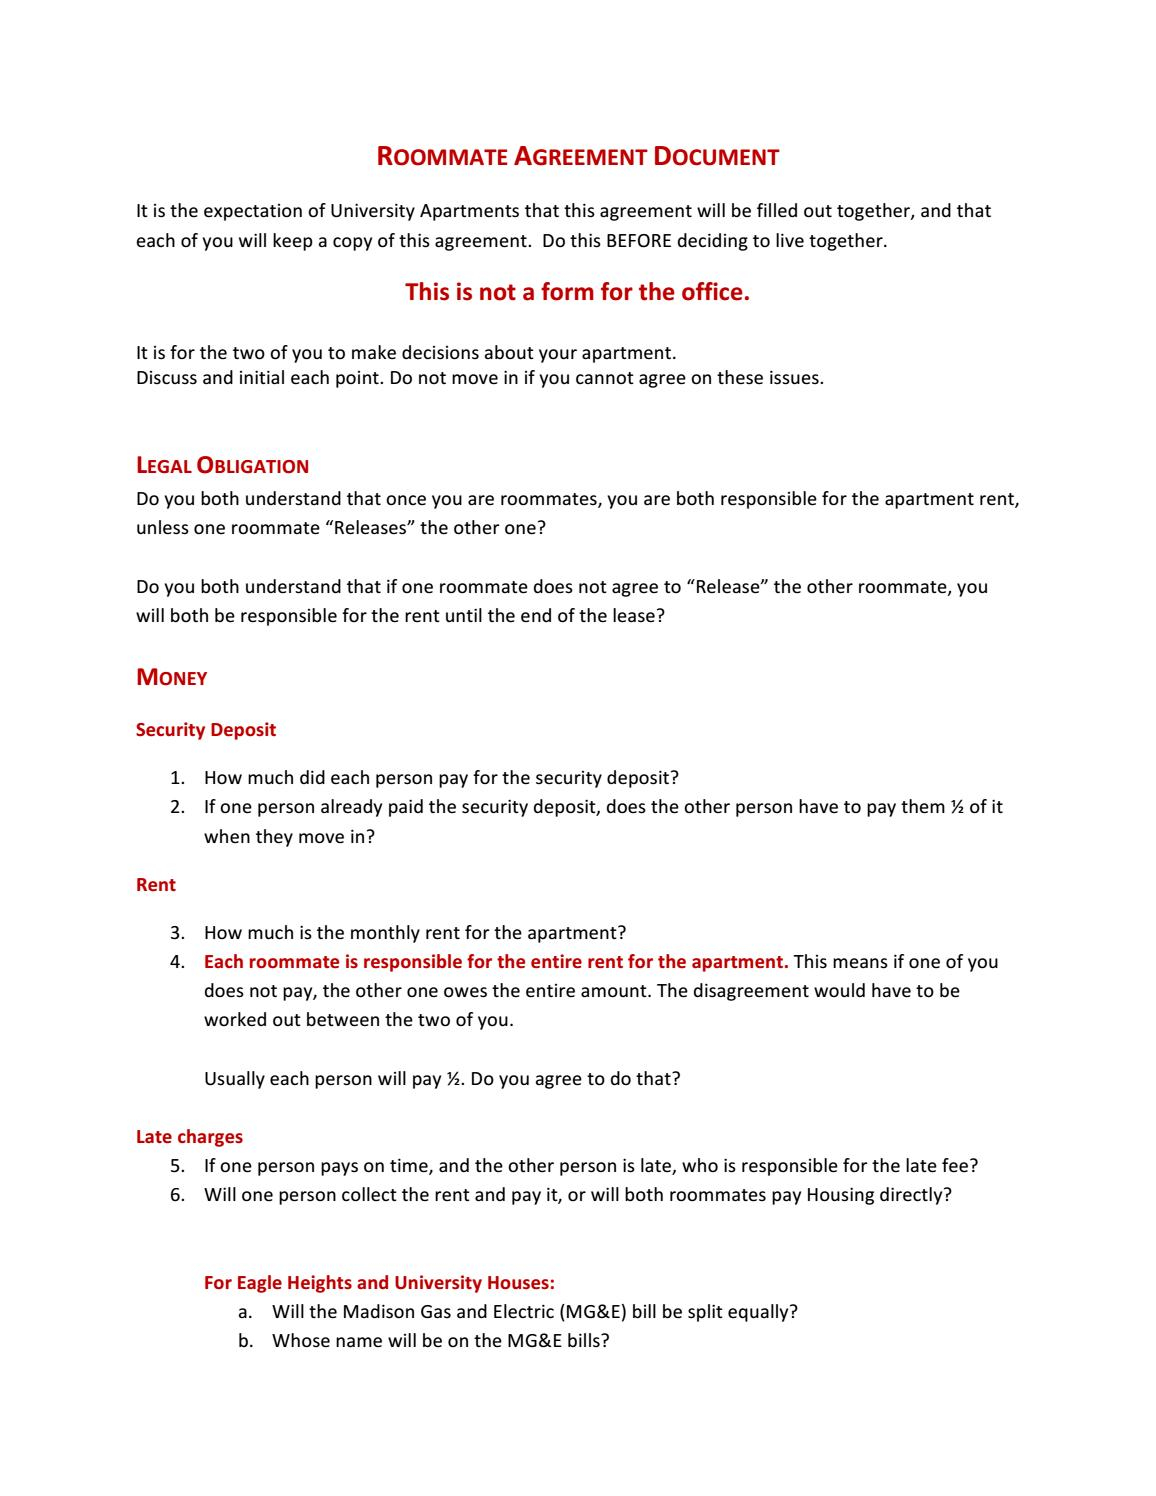 University Apartments Roommate Agreement By UW Madison Housing – Issuu Within Security Deposit Agreement Between Roommates